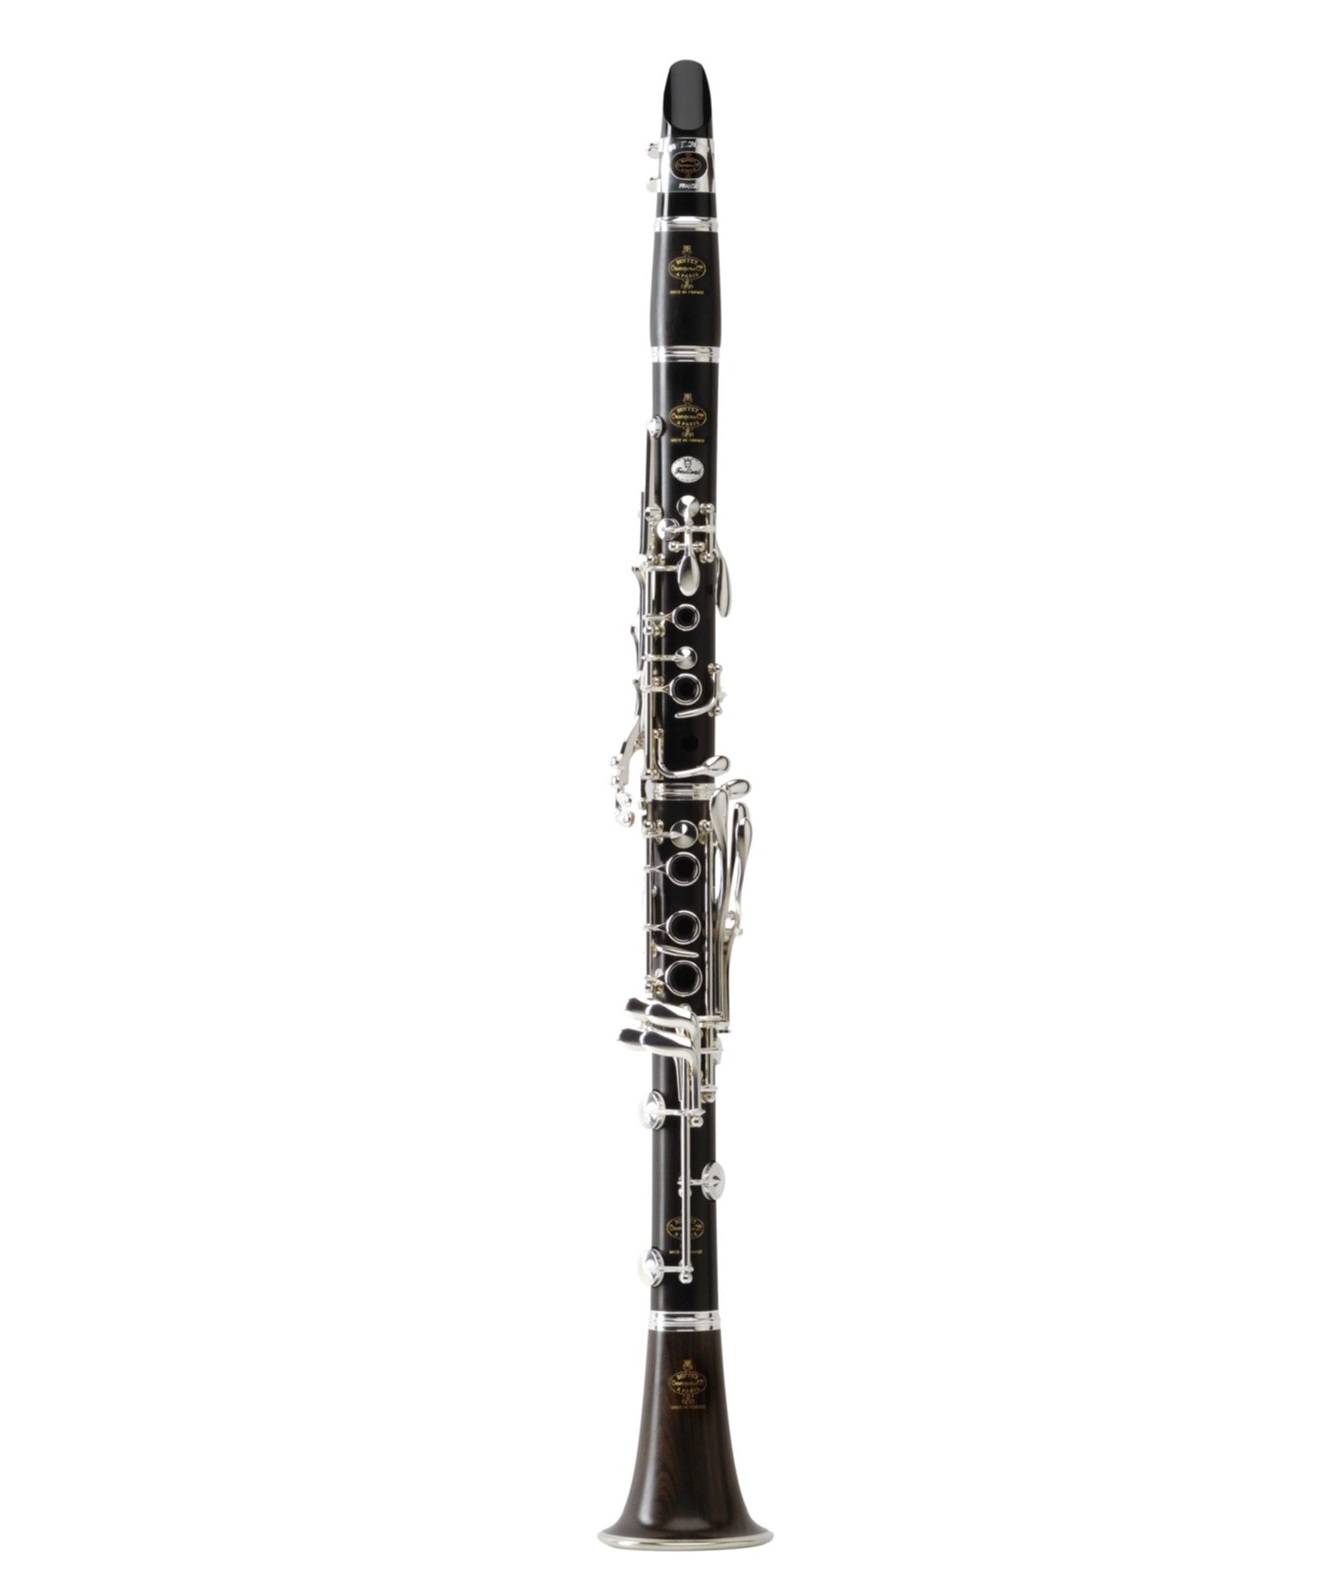 Clarinet in A, mod. Festival, by Buffet Crampon